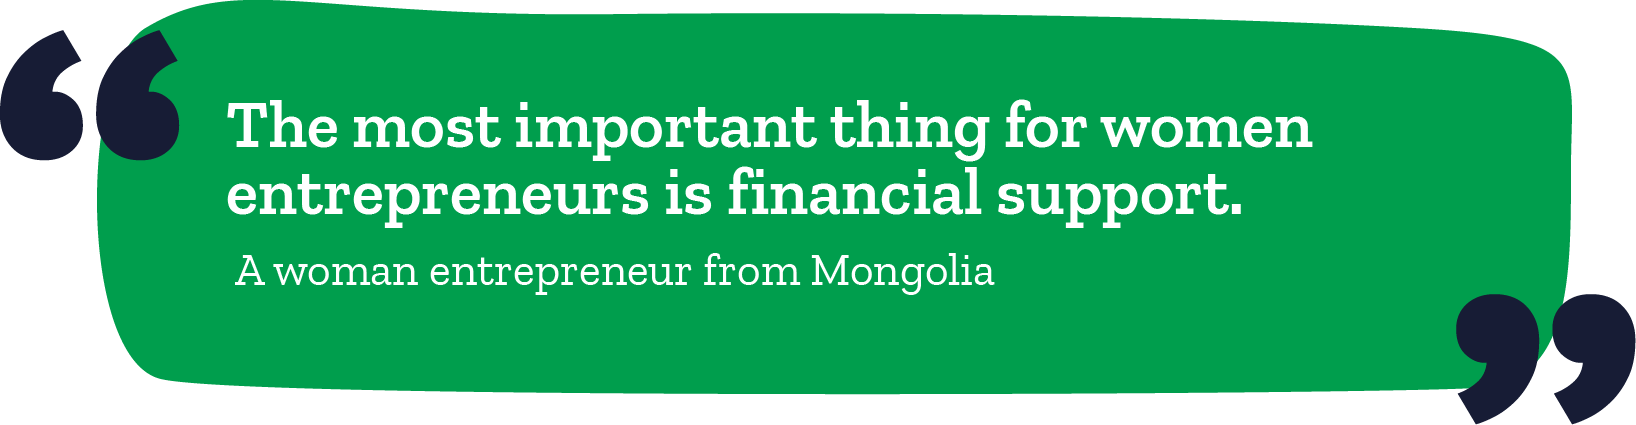 "The most important thing for women entrepreneurs is financial support." -A woman entrepreneur from Mongolia